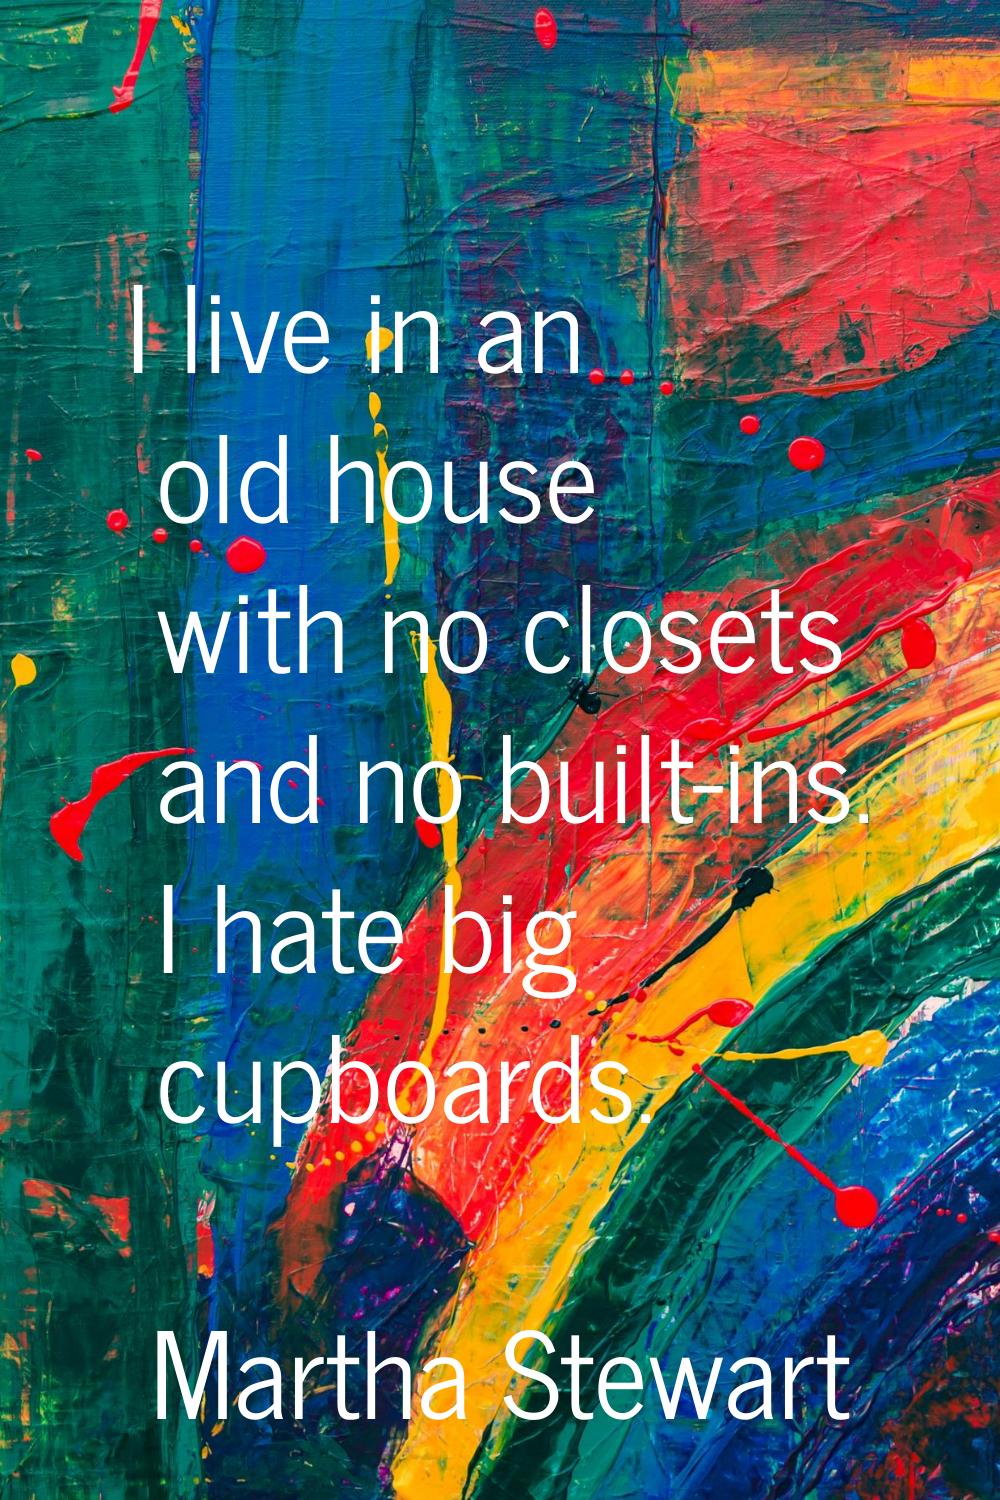 I live in an old house with no closets and no built-ins. I hate big cupboards.